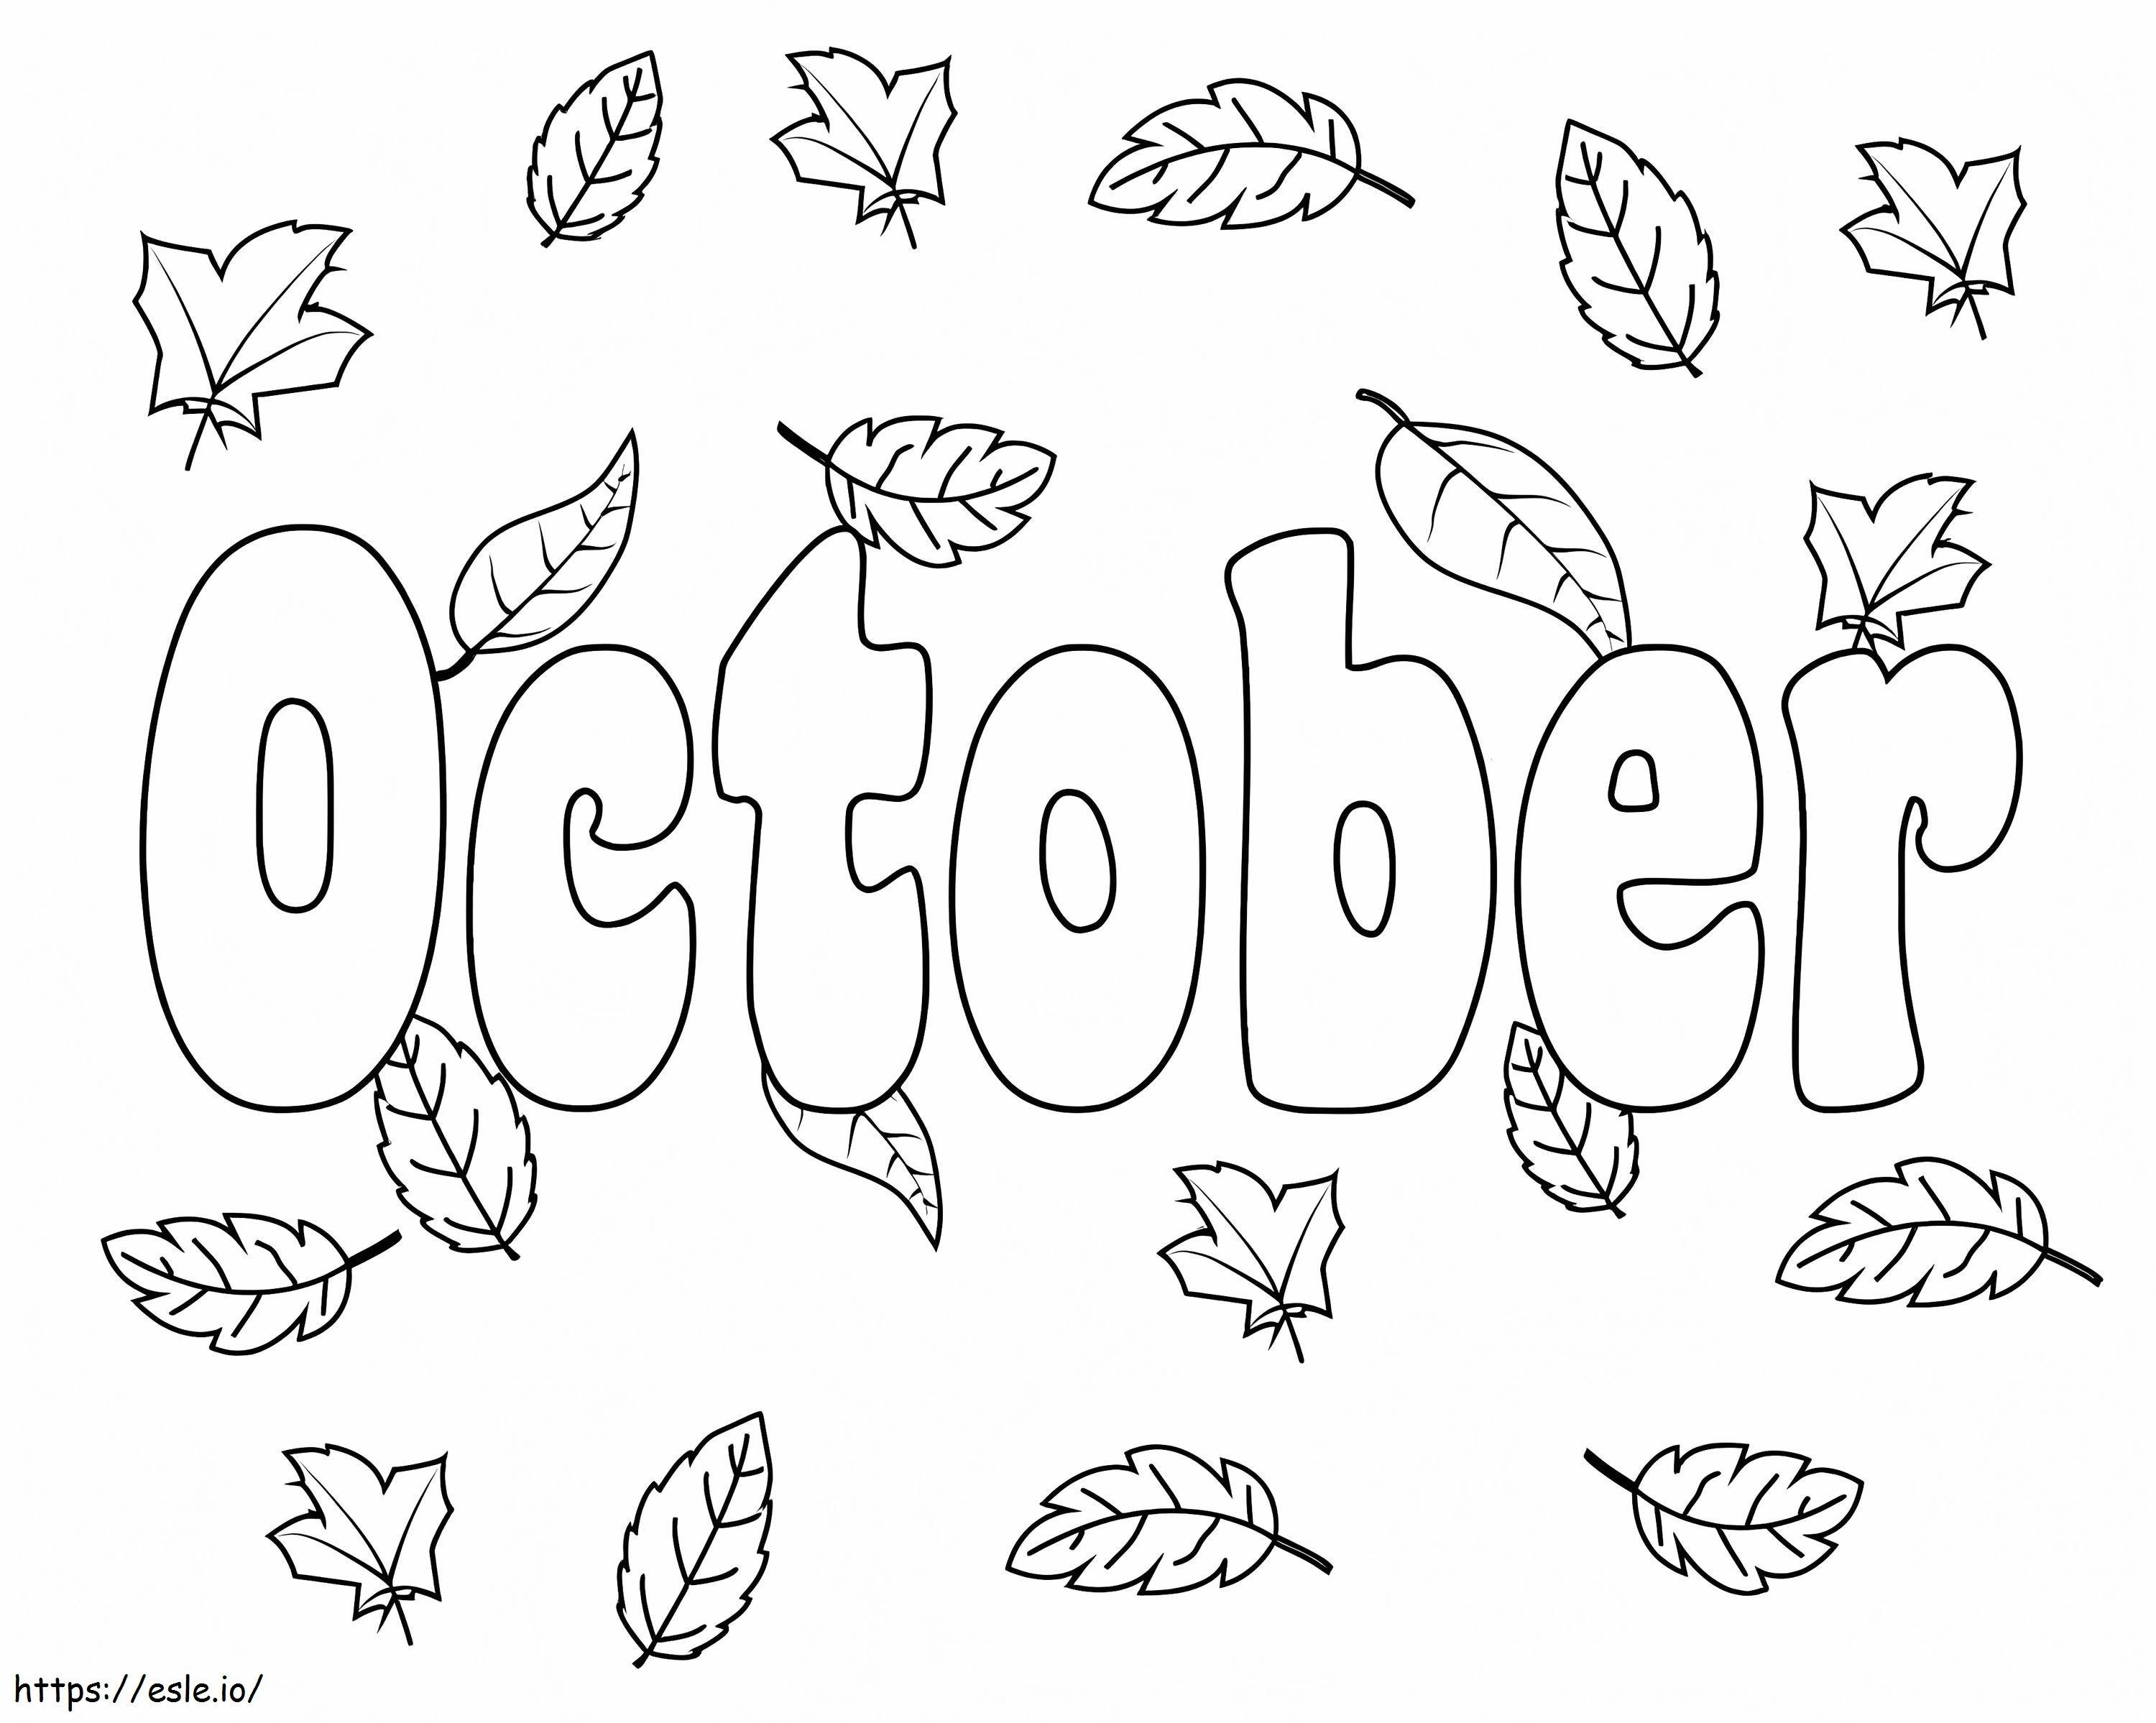 October With Leaf coloring page